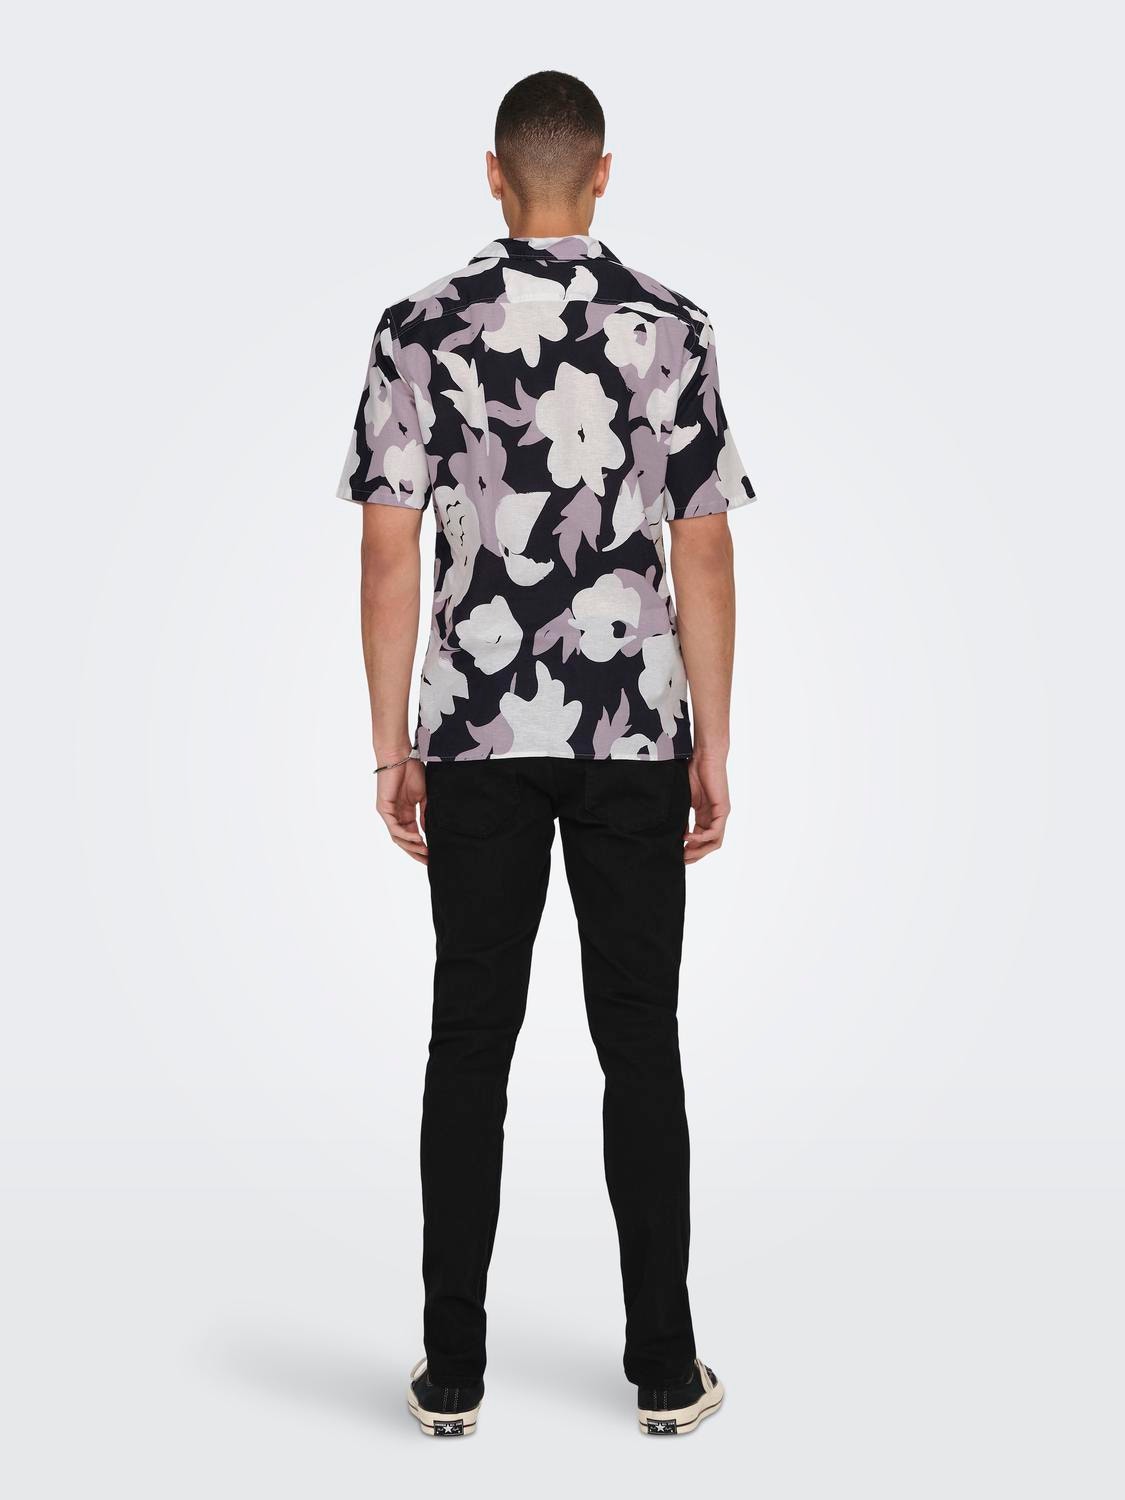 ONLY & SONS Short sleeved shirt with print -Nirvana - 22025125